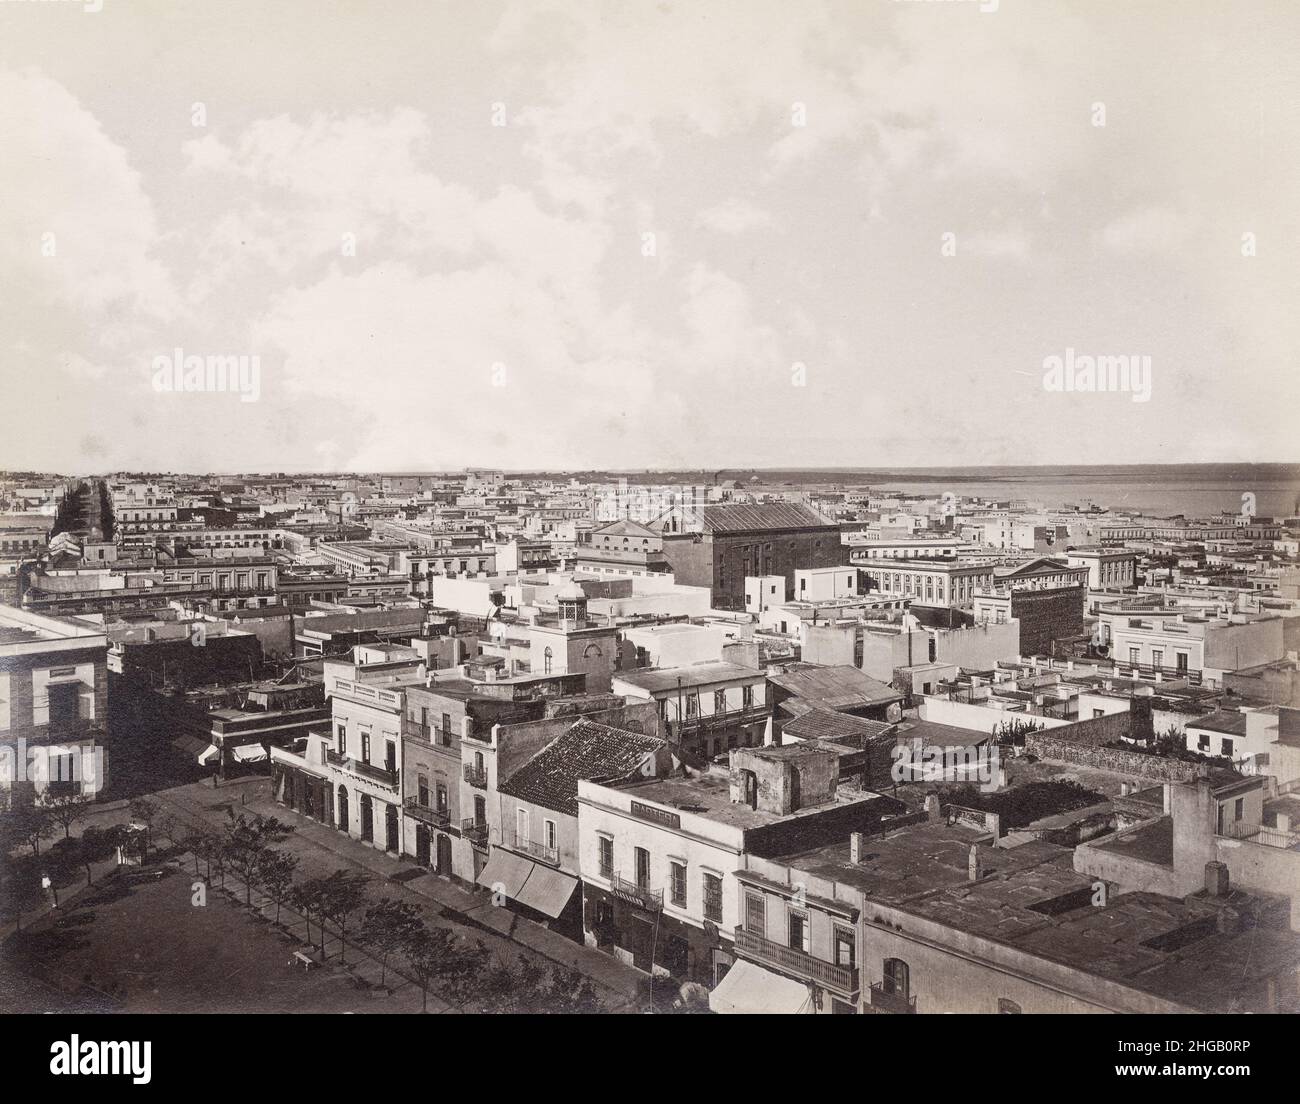 Vintage 19th century photograph - South America Uruguay: view of Montevideo Stock Photo